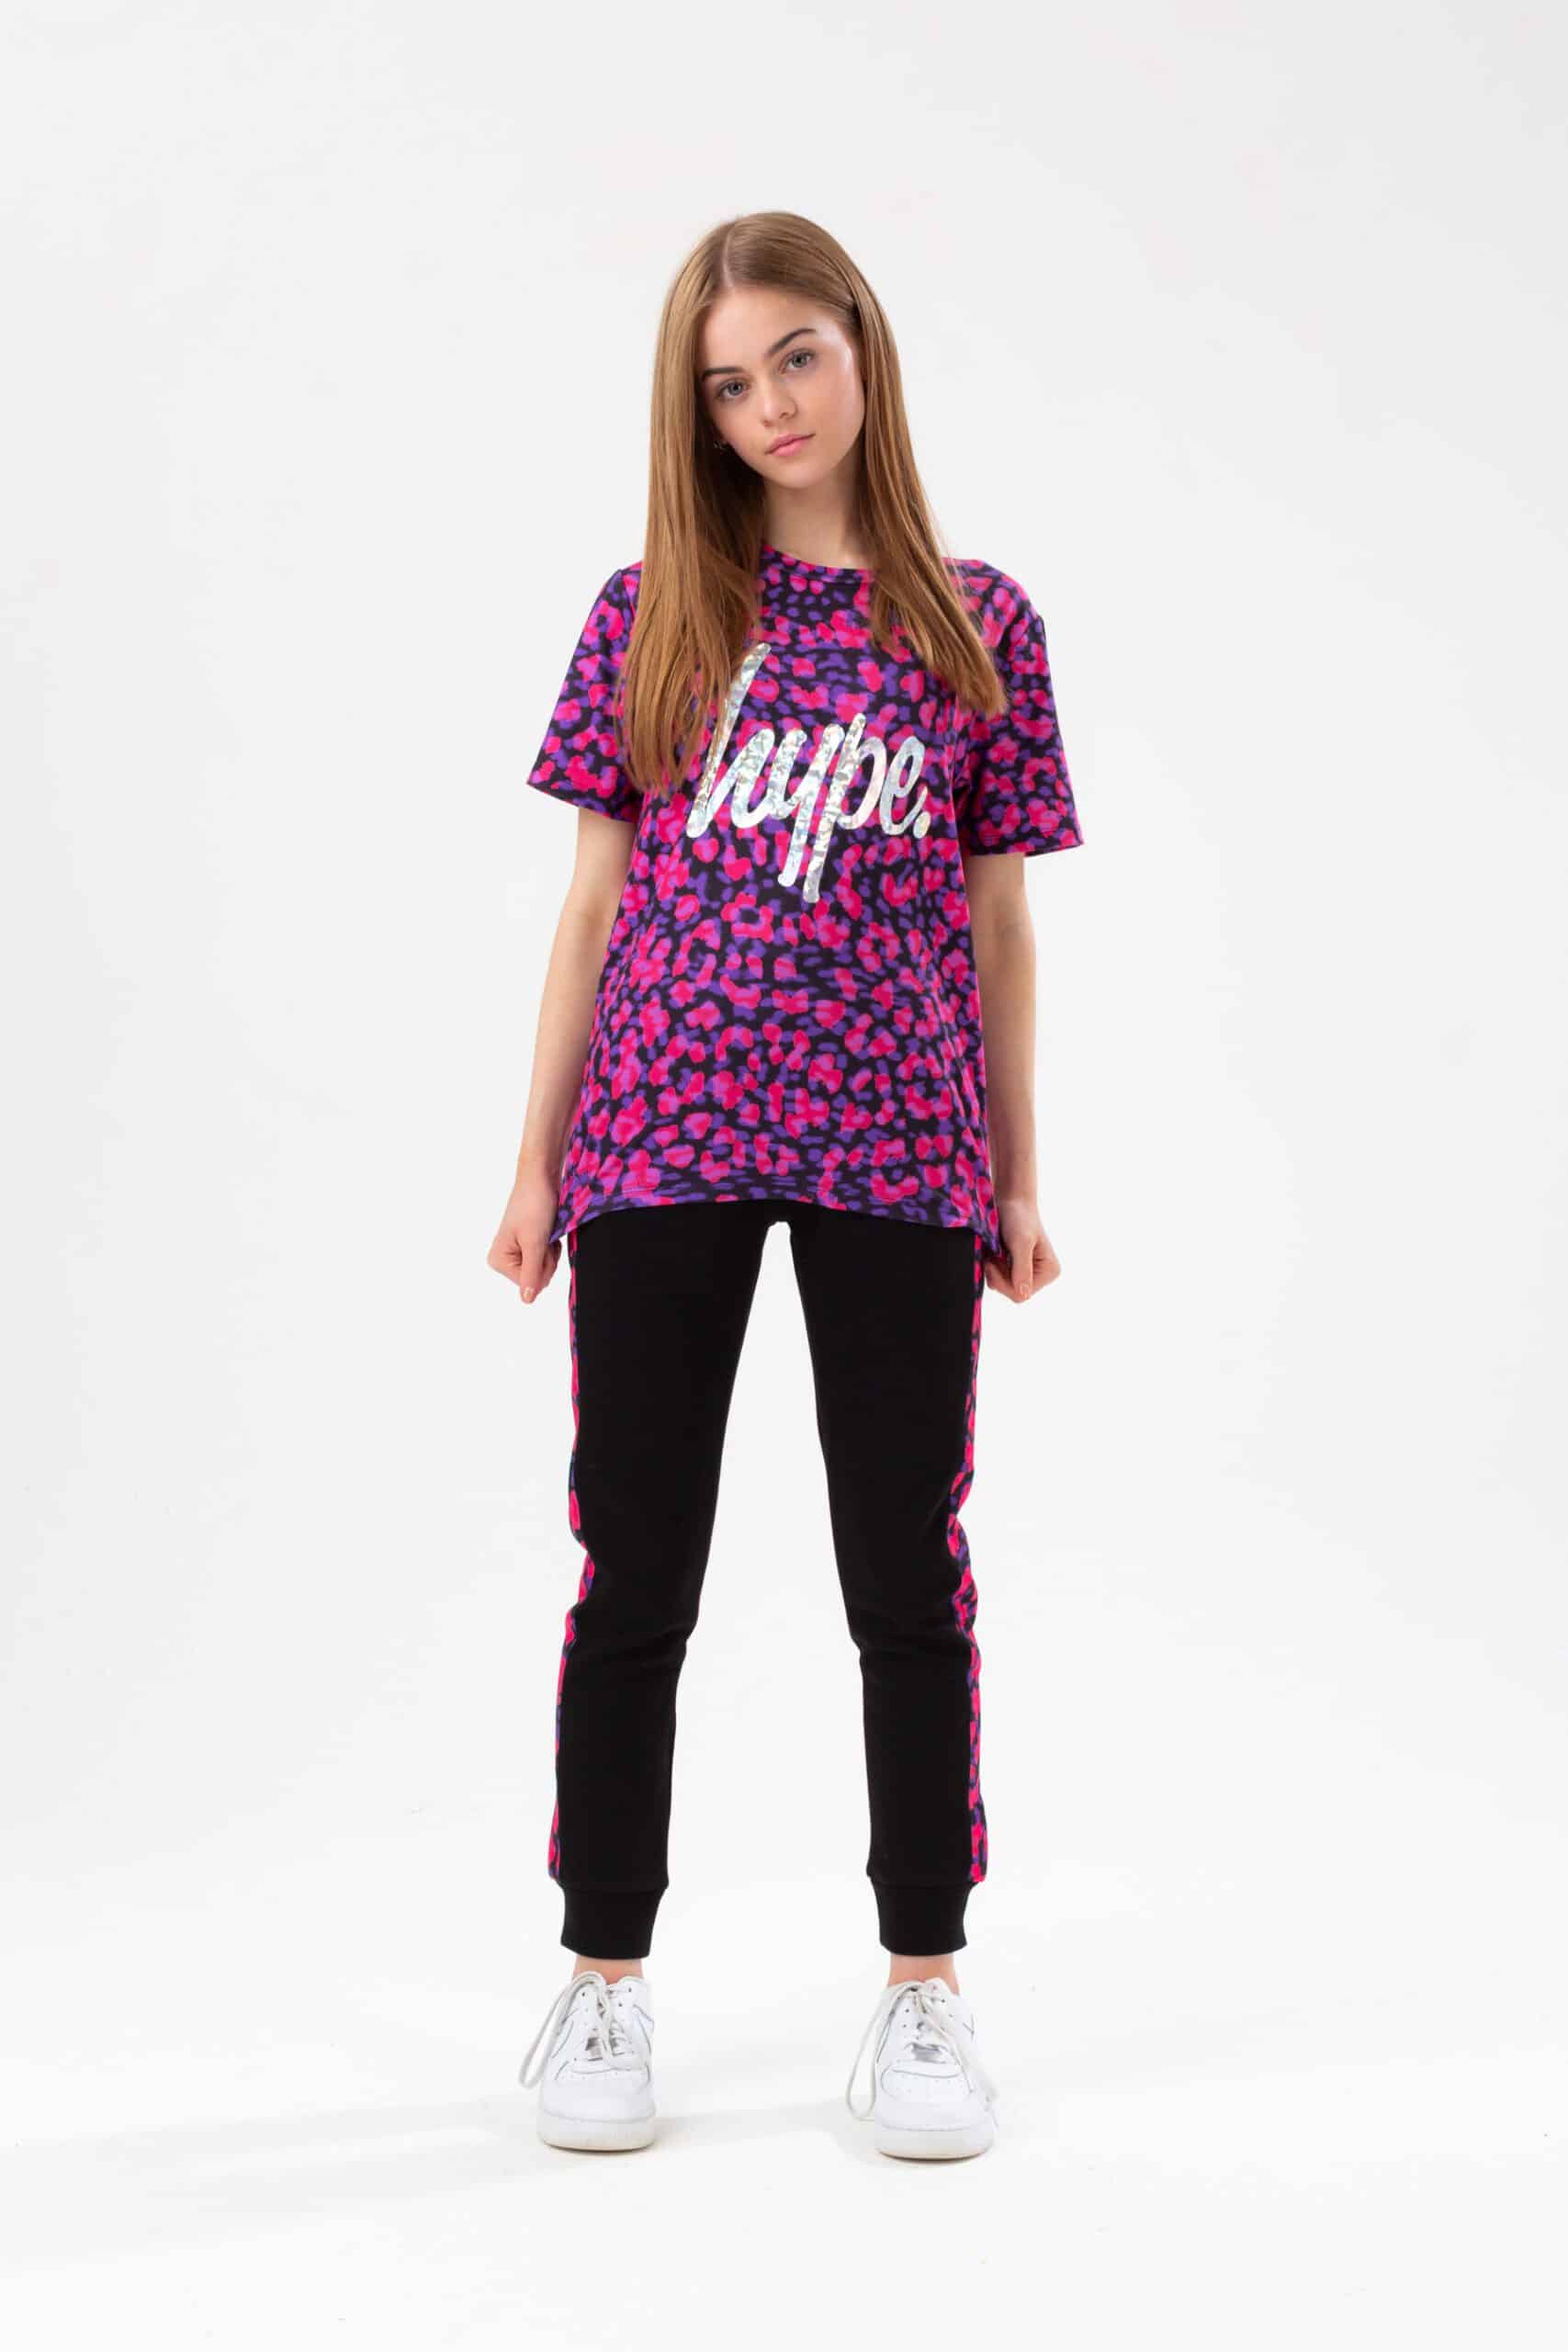 girls hype leopard print pink and purple tshirt on model